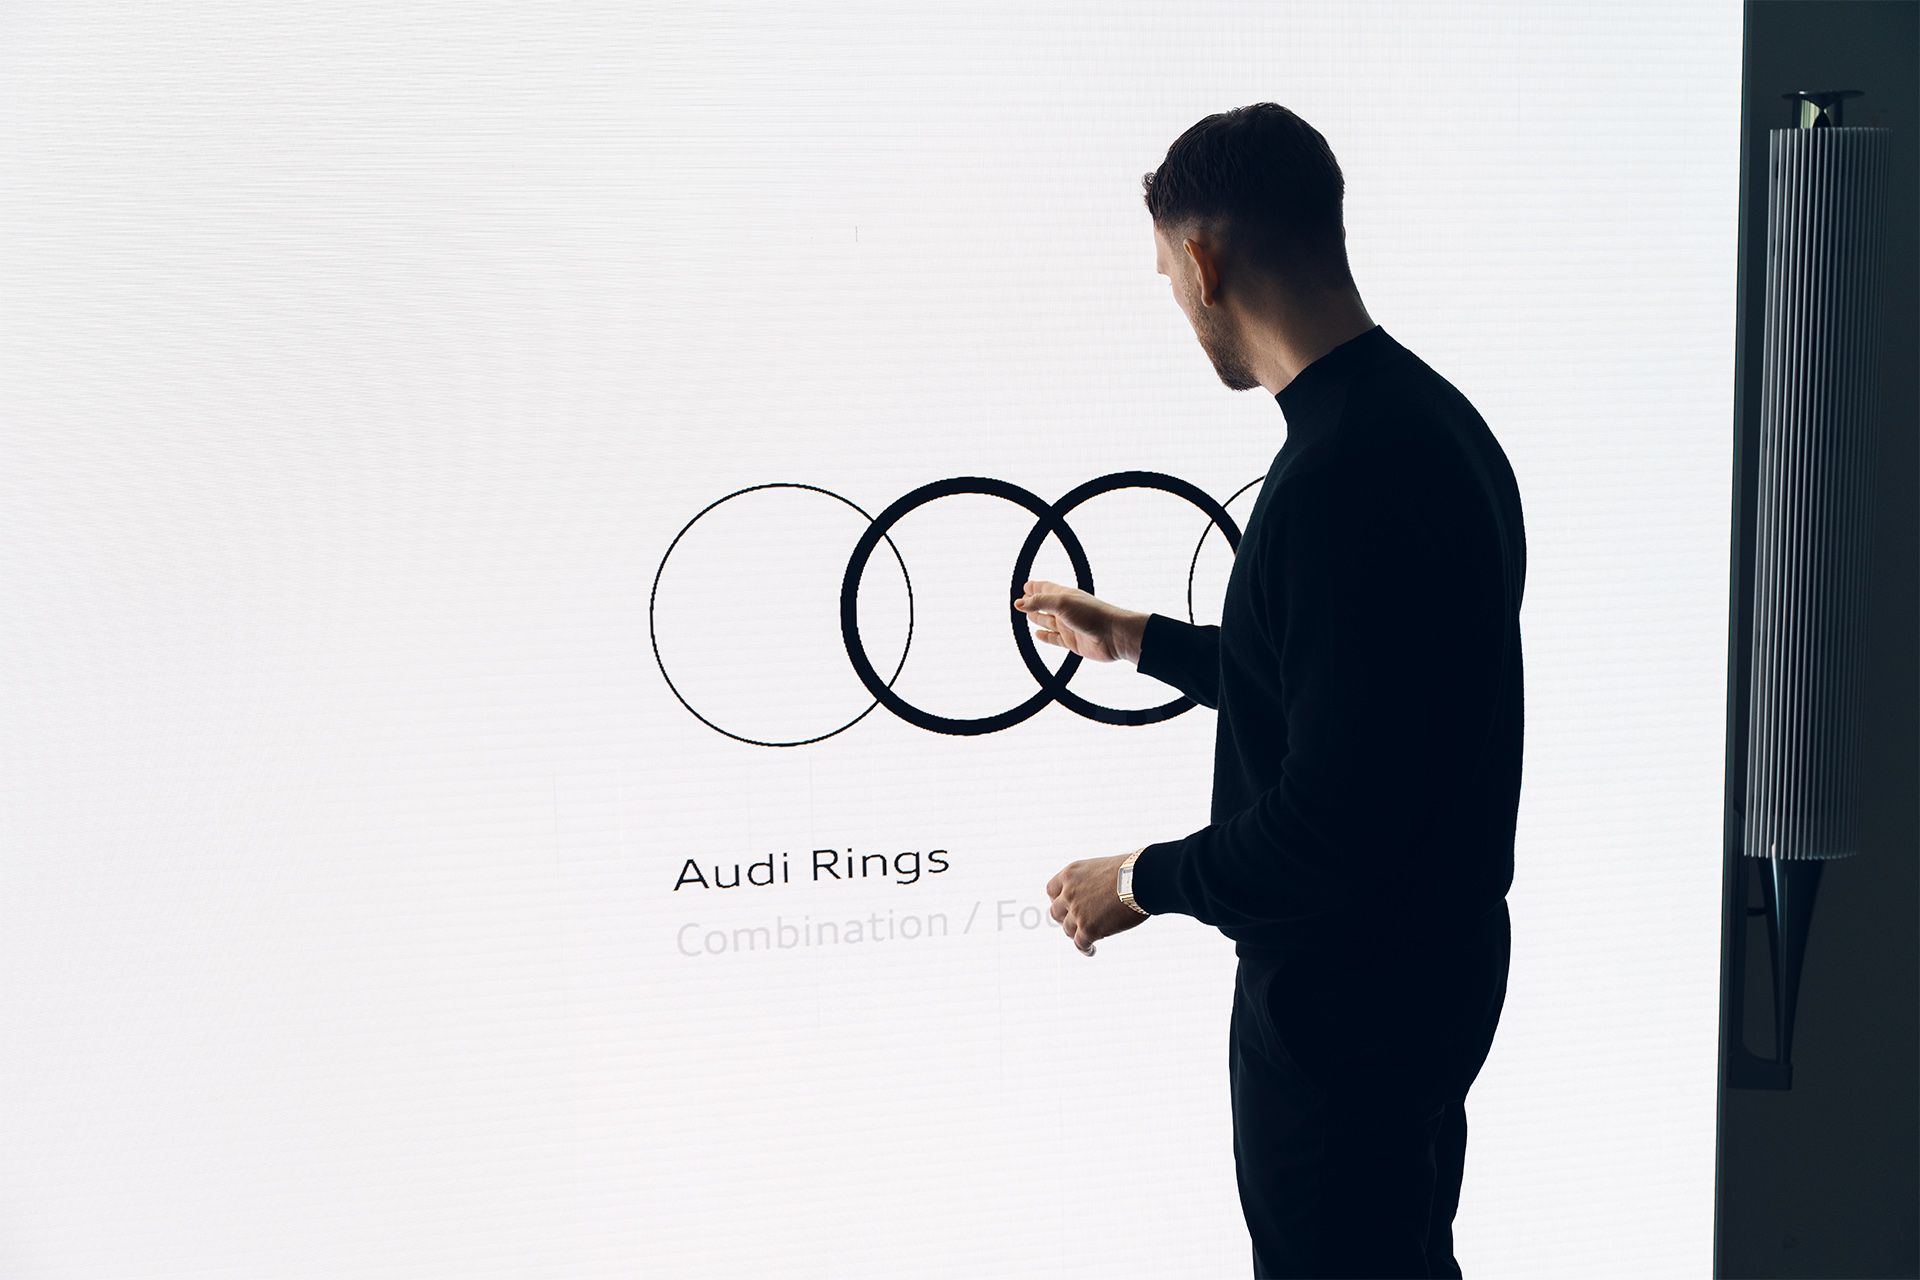 The Audi rings on a screen.